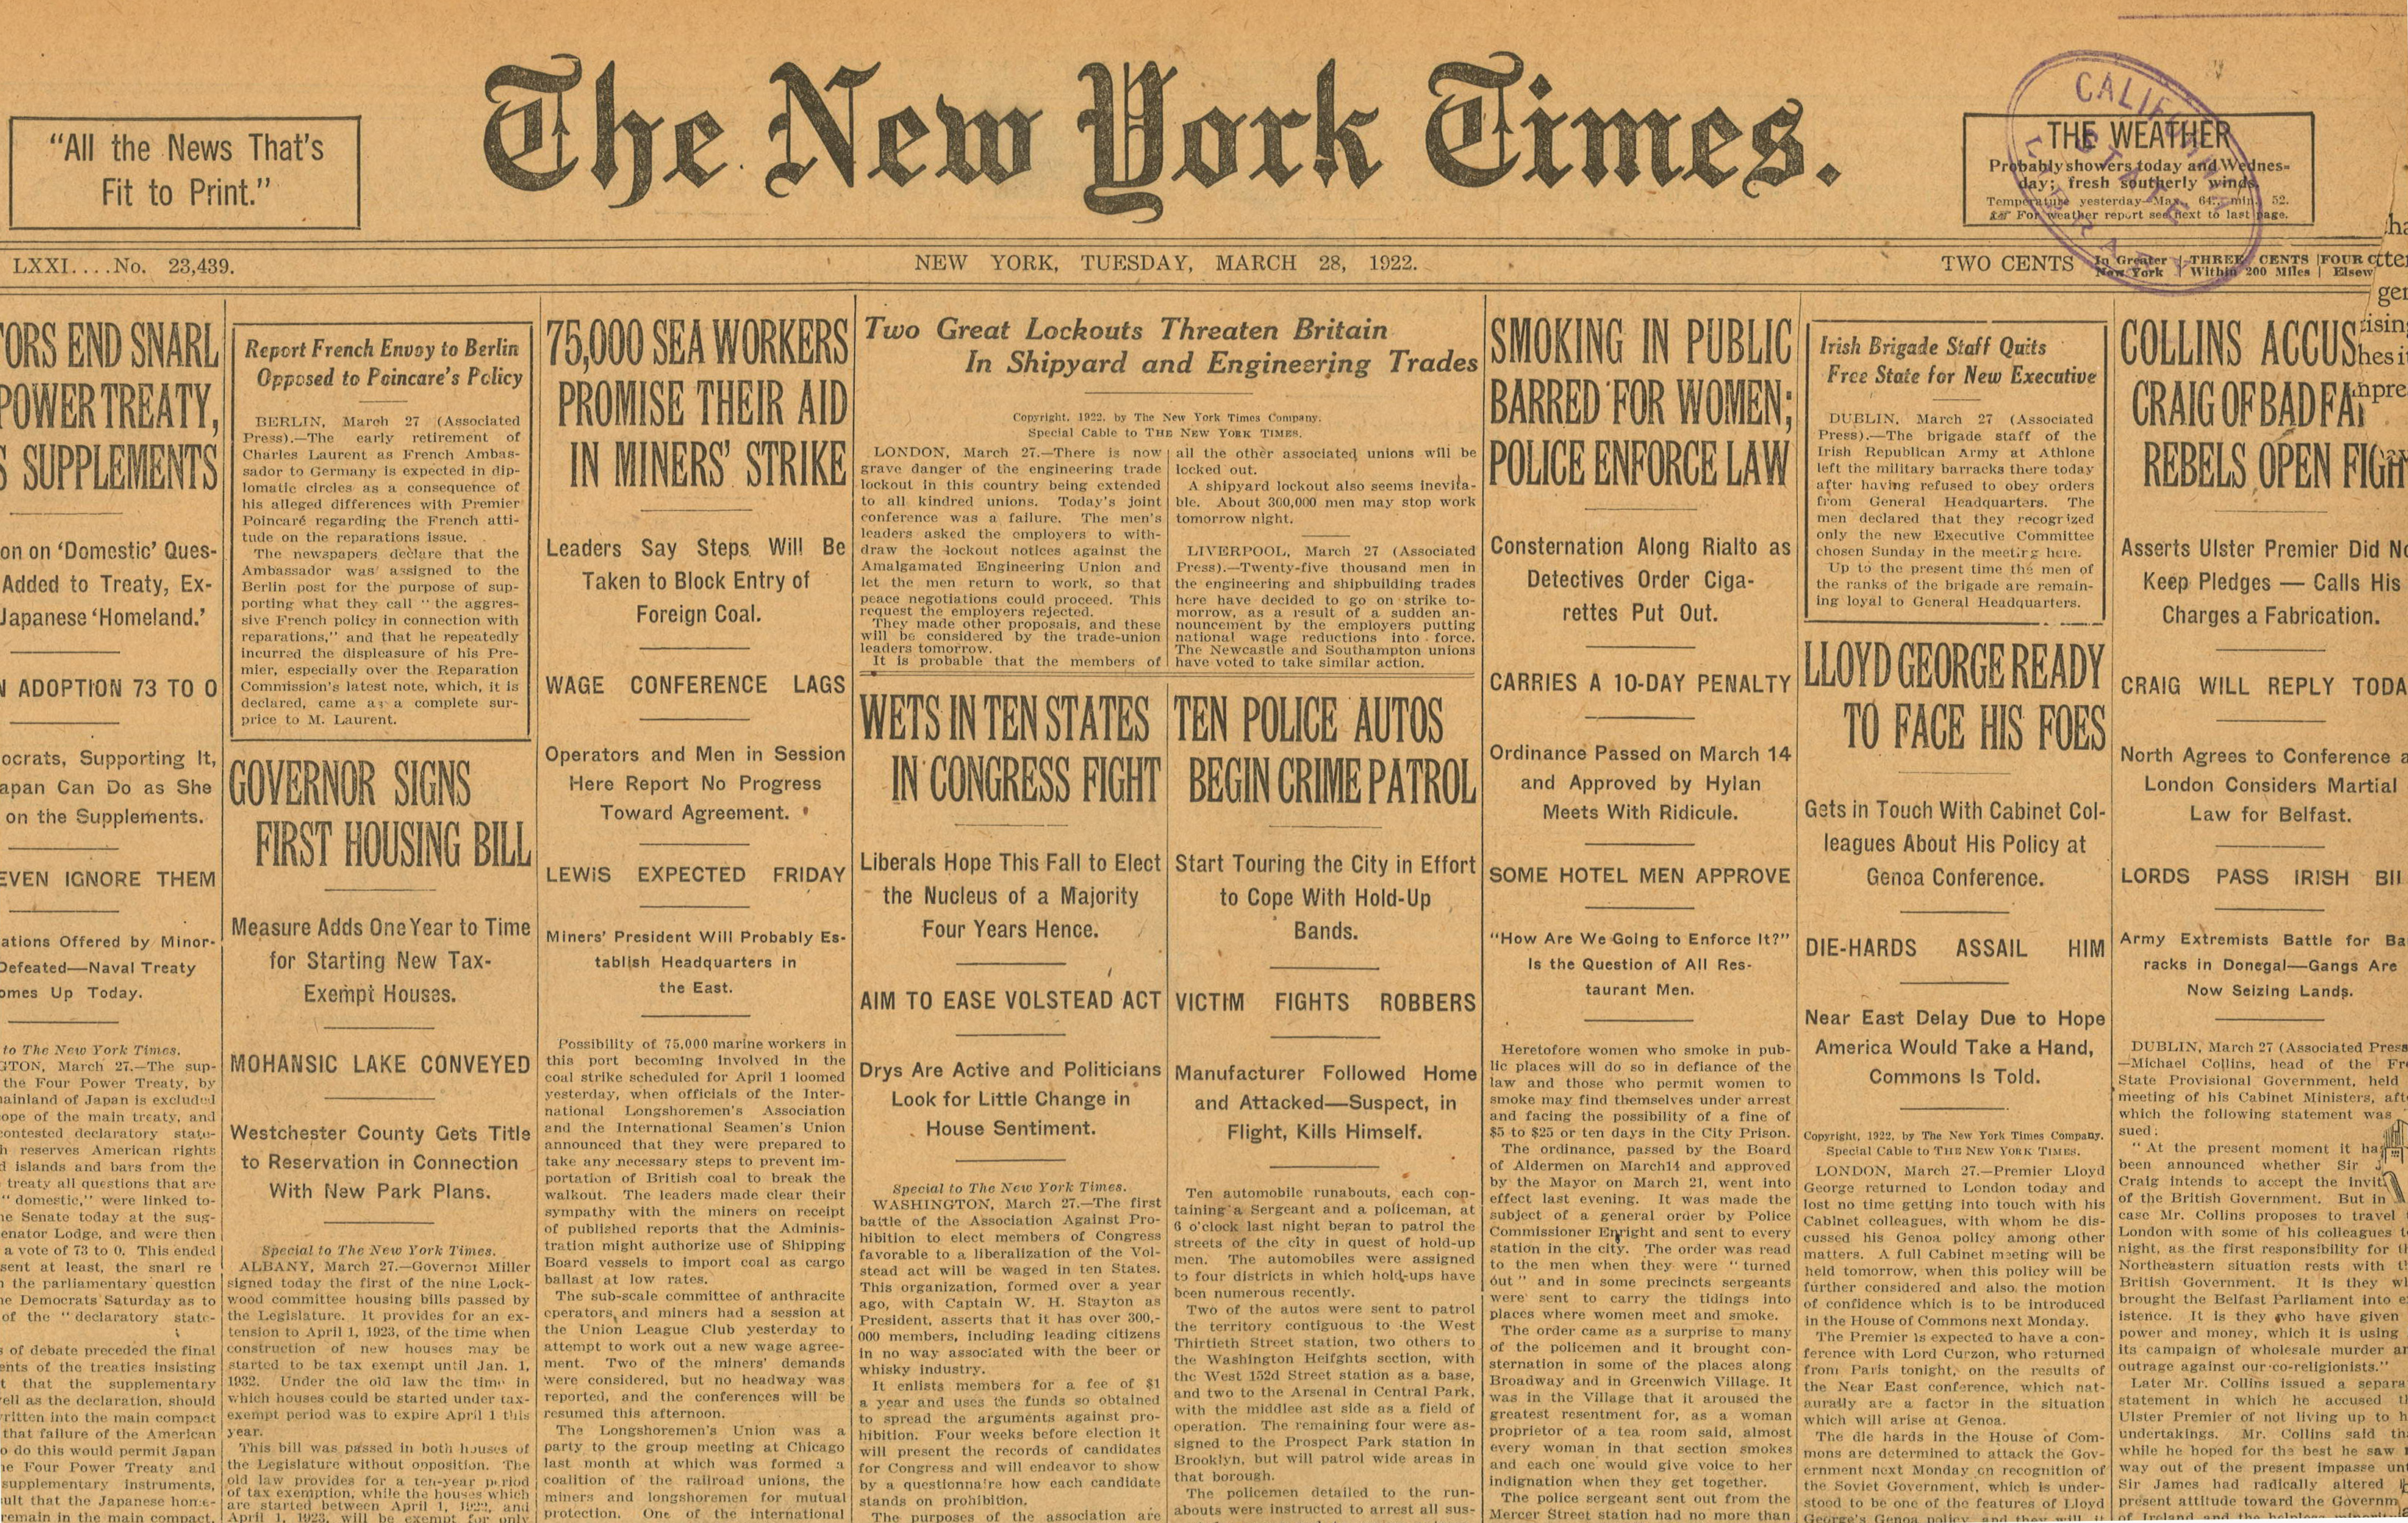 1922 NY Times Smoking in Public Barred for Women